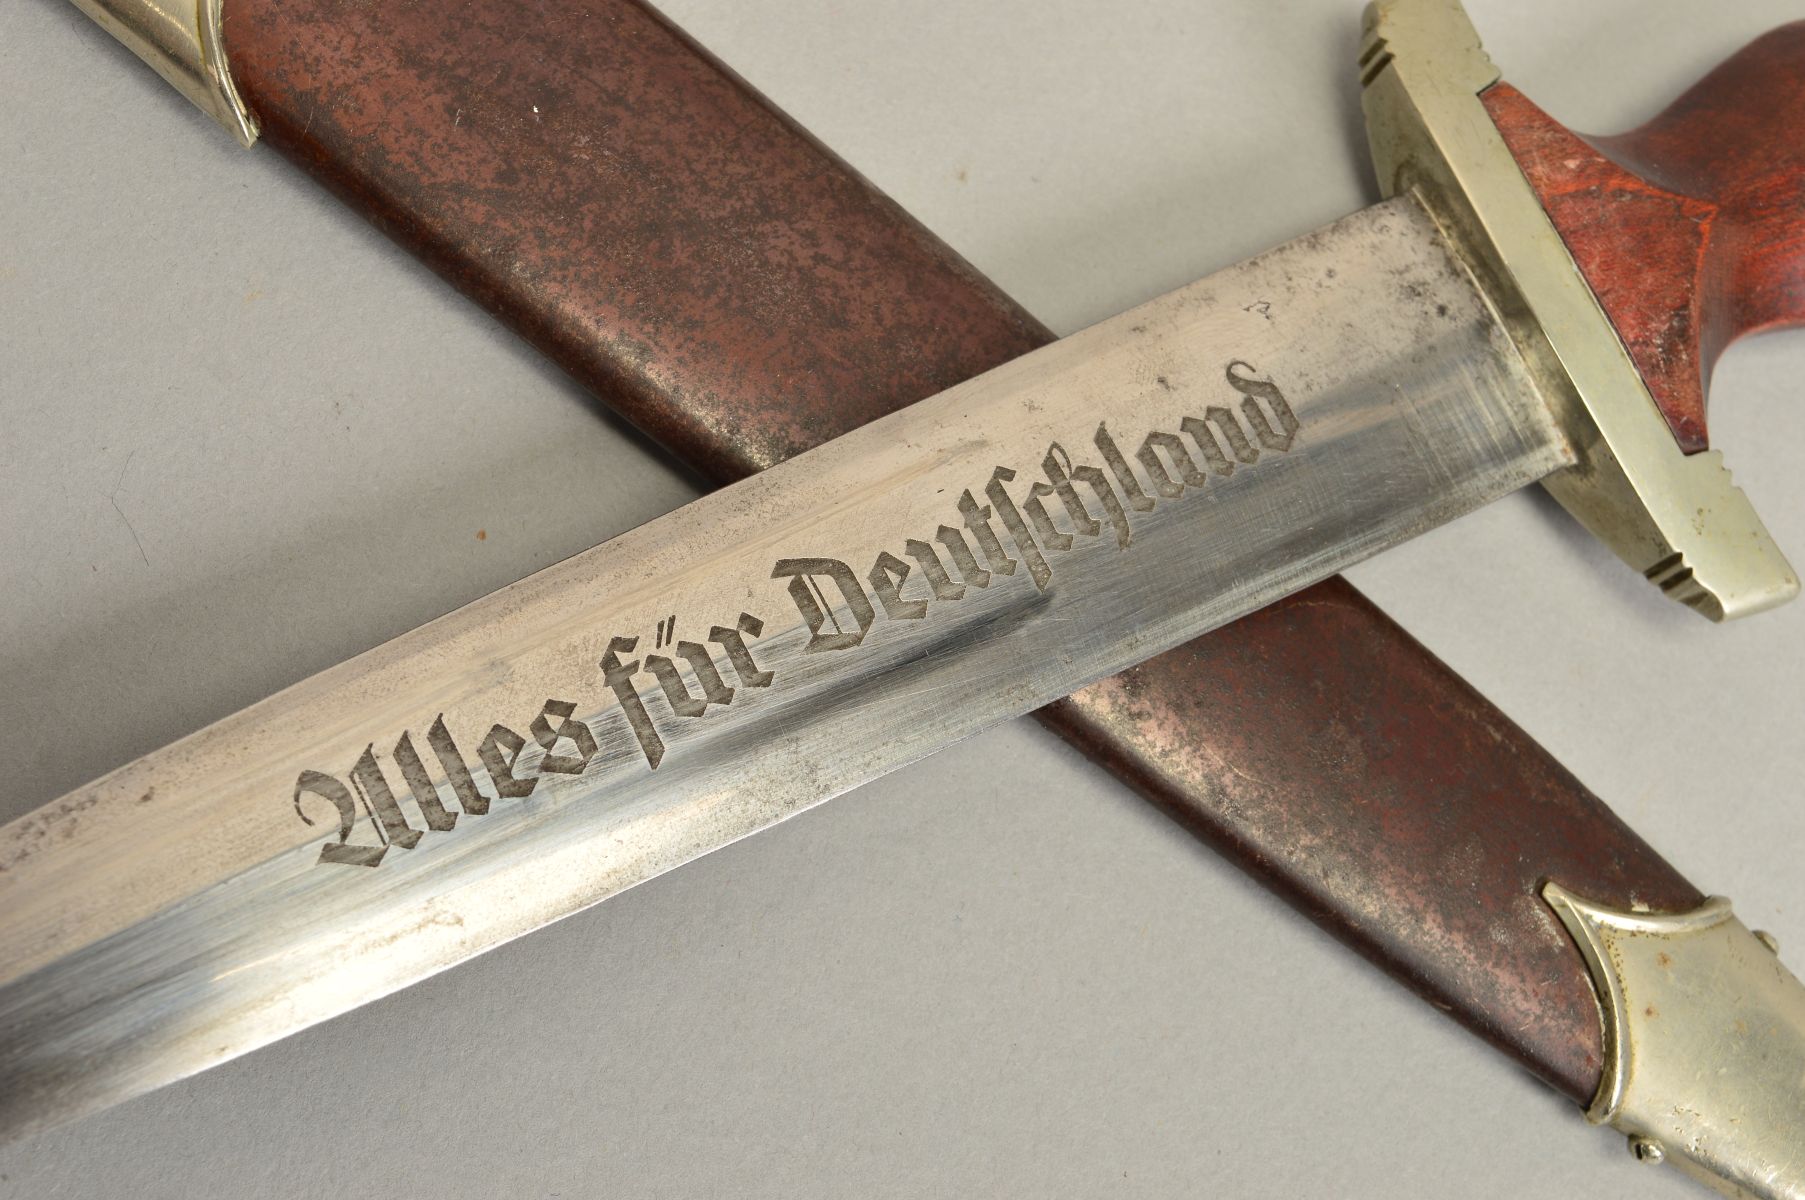 A GERMAN 3RD REICH ISSUE 'SA' DAGGER AND SCABBARD, the grip has the usual SA logo and Eagle swastika - Image 3 of 6